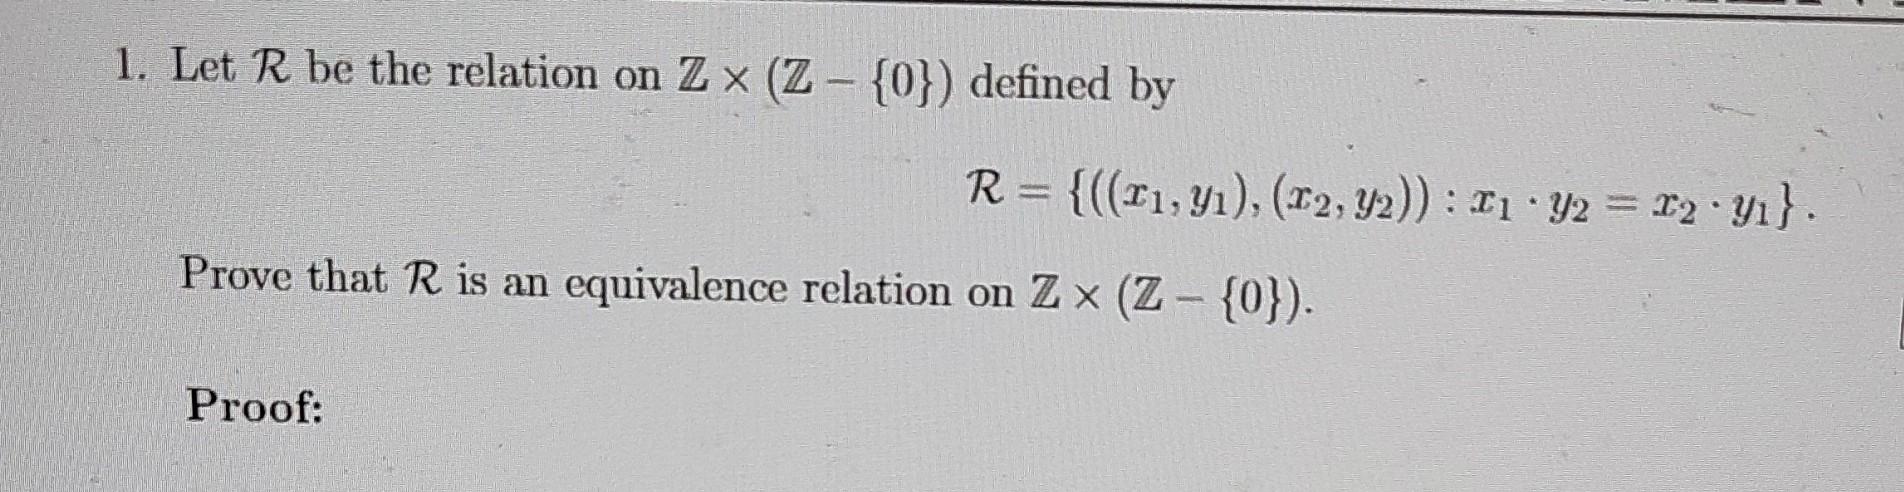 1. Let \( \mathcal{R} \) be the relation on \( \mathbb{Z} \times(\mathbb{Z}-\{0\}) \) defined by
\[
\mathcal{R}=\left\{\left(